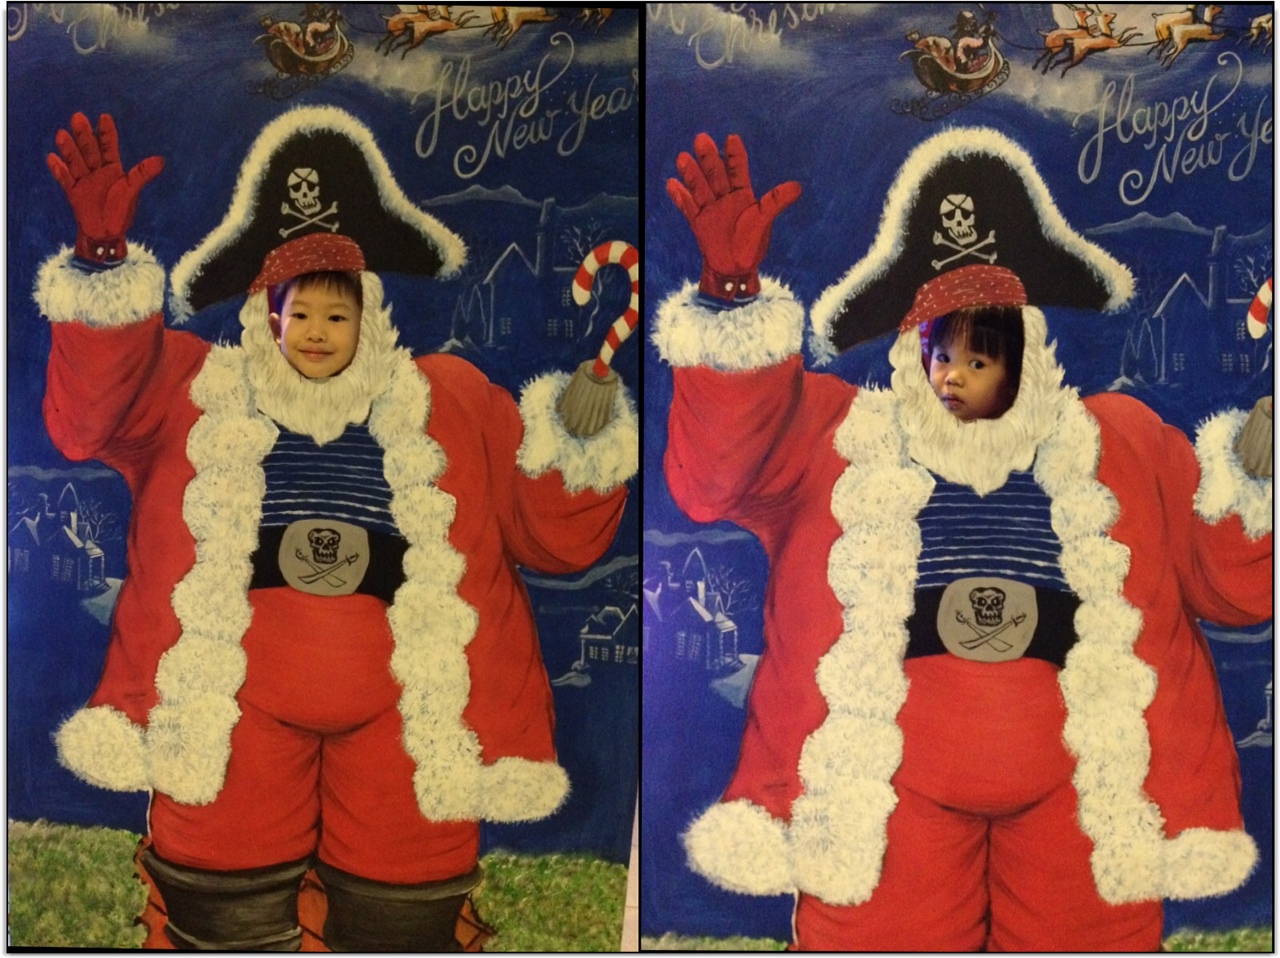 Merry Christmas from the Kao pirates!